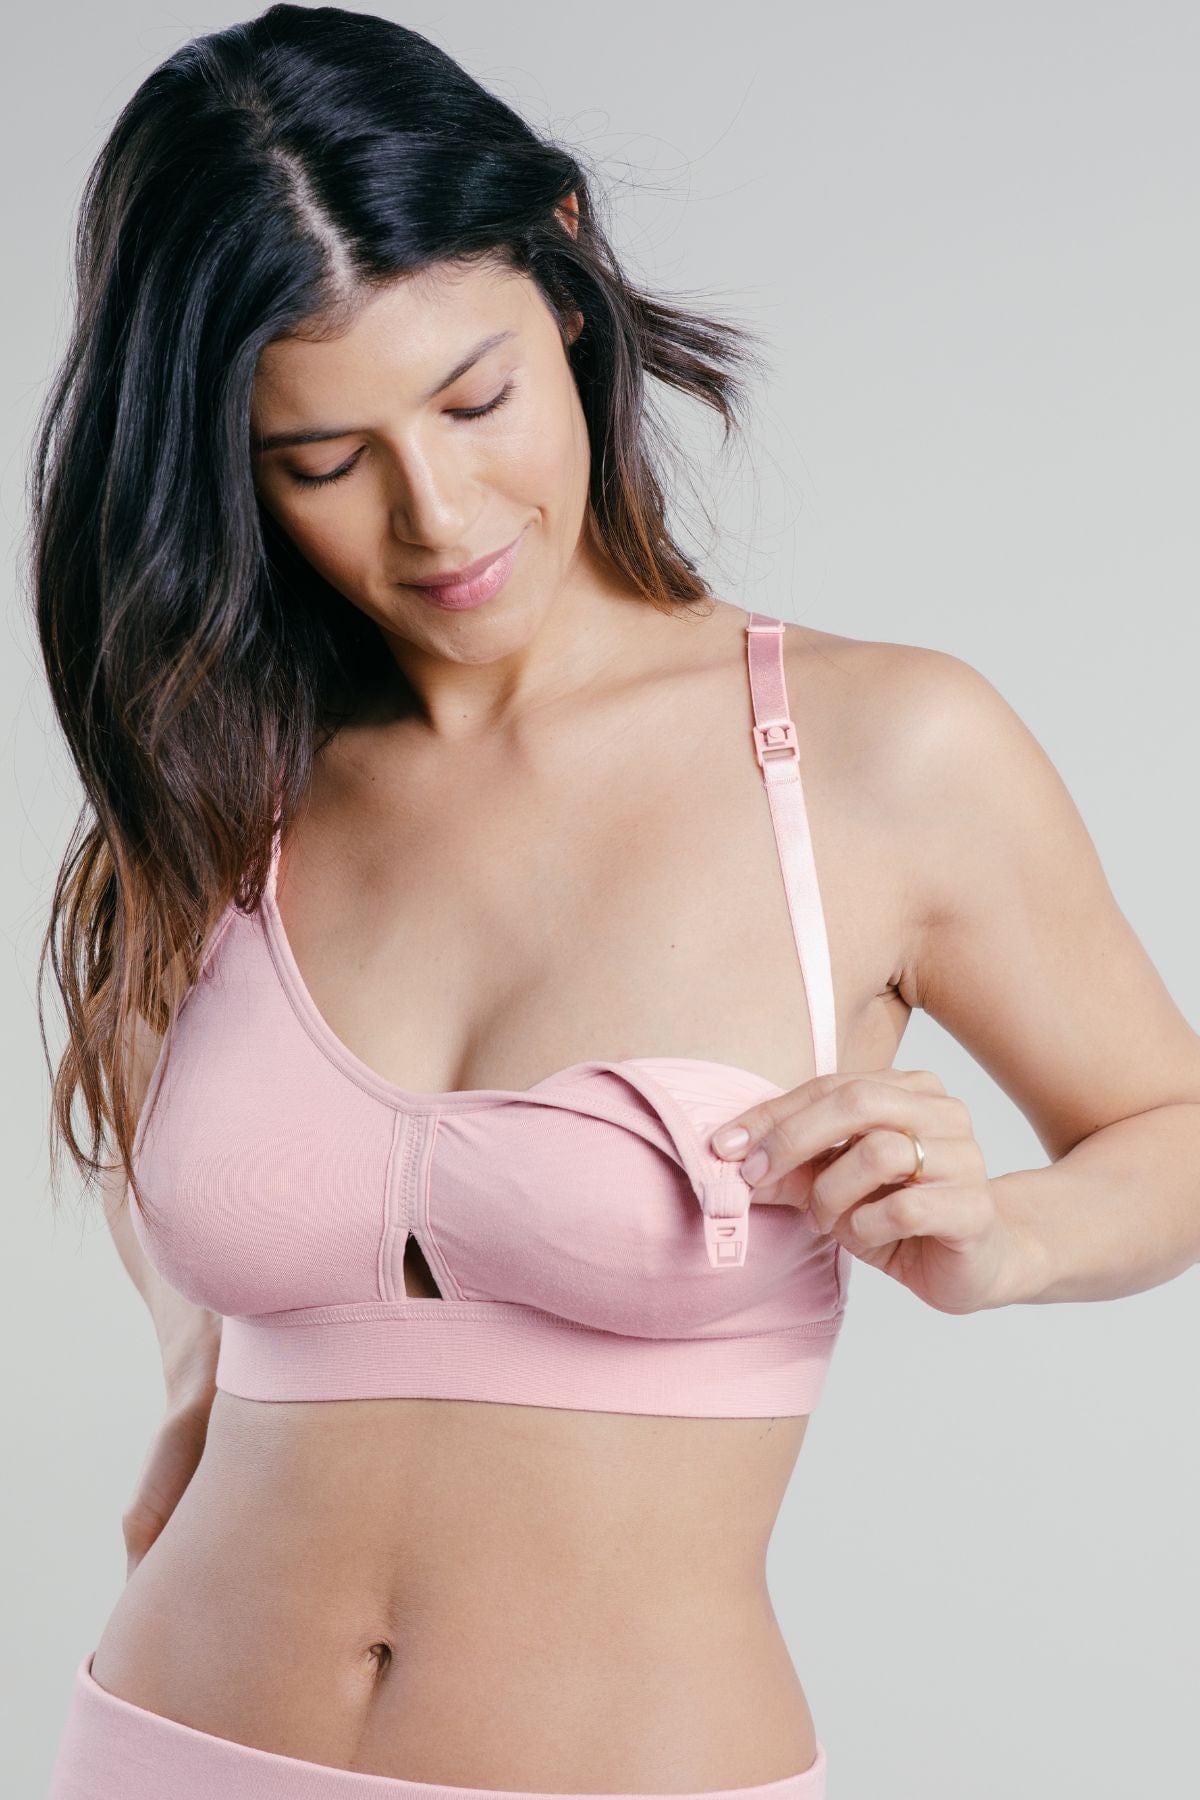 This Mom Couldn't Find a Sports Bra That Does What It's Supposed To. So,  She Invented One.